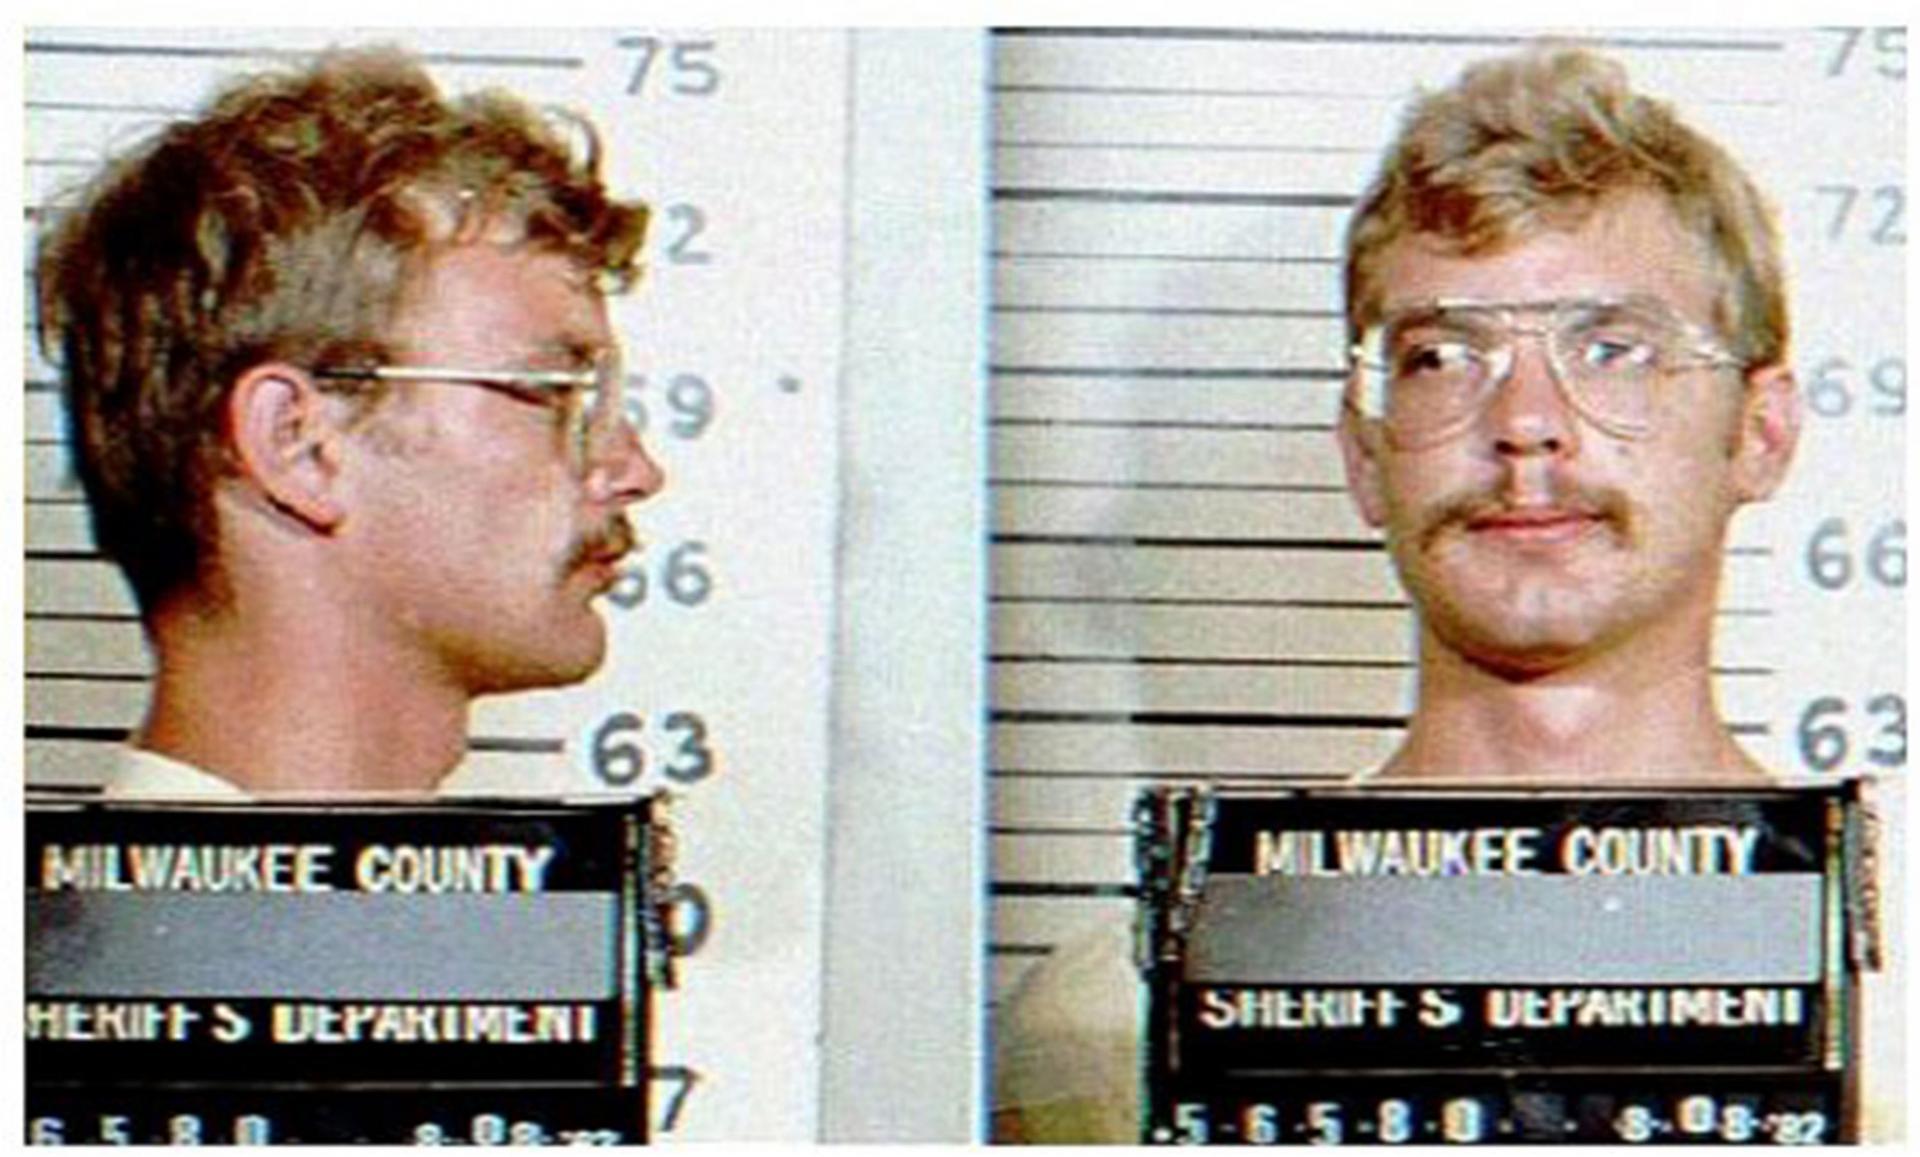 Conversations with a Killer: The Jeffrey Dahmer Tapes (TV Mini Series 2022)  - IMDb